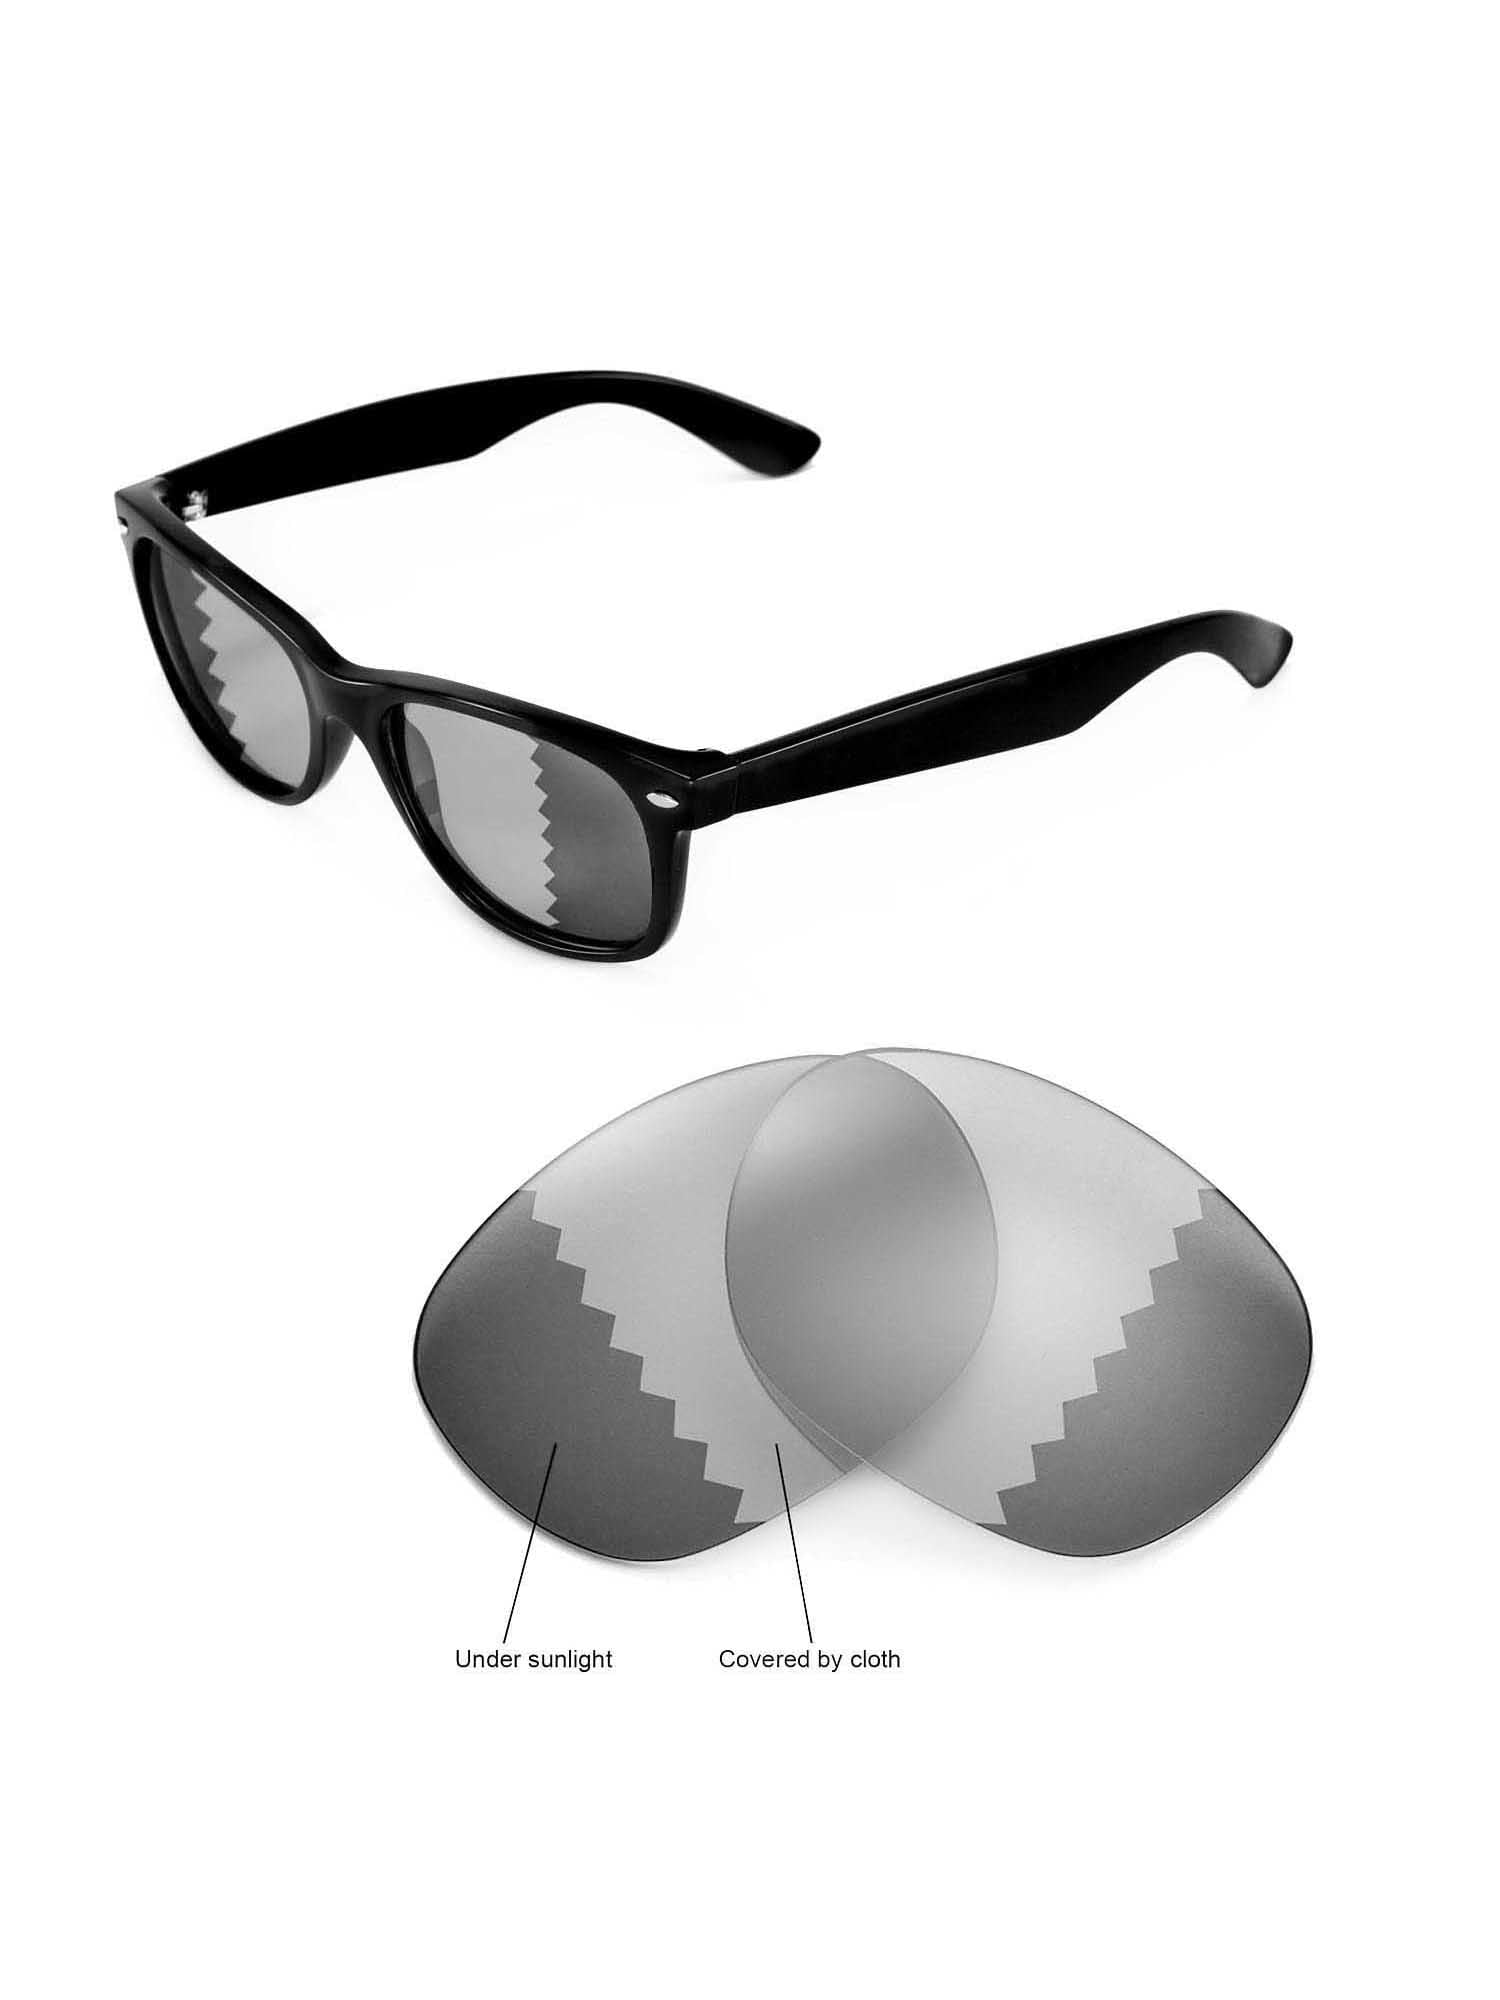 Walleva Transition/Photochromic Polarized Replacement Lenses for Ray-Ban  RB2132 55mm Sunglasses 